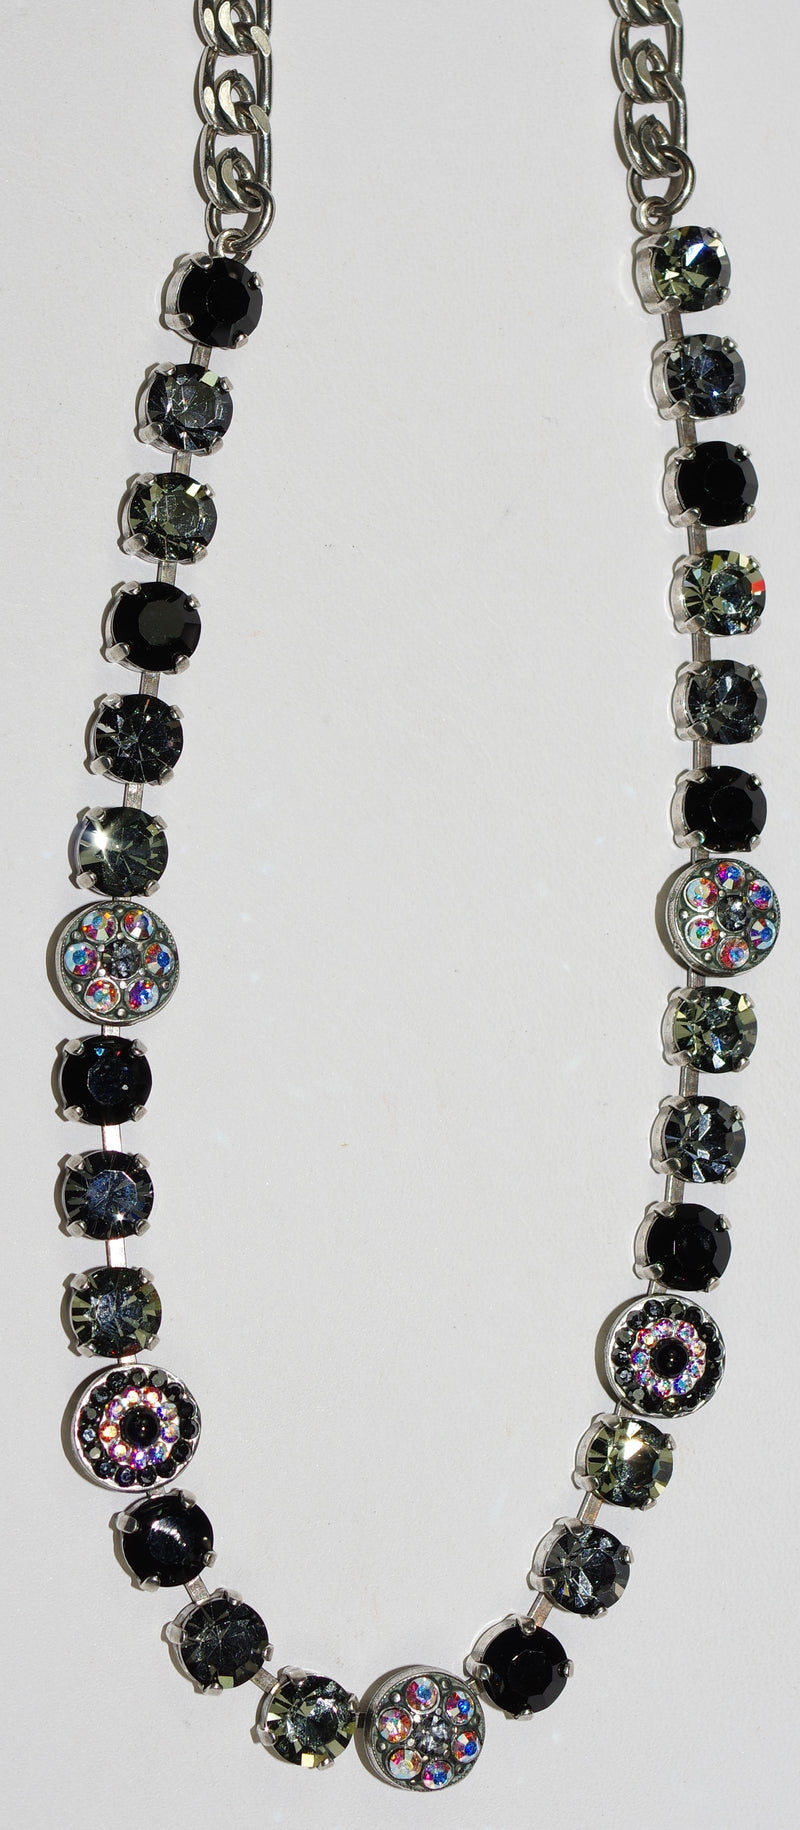 MARIANA NECKLACE TUXEDO: black, a/b, taupe stones in silver rhodium setting, 17" adjustable chain